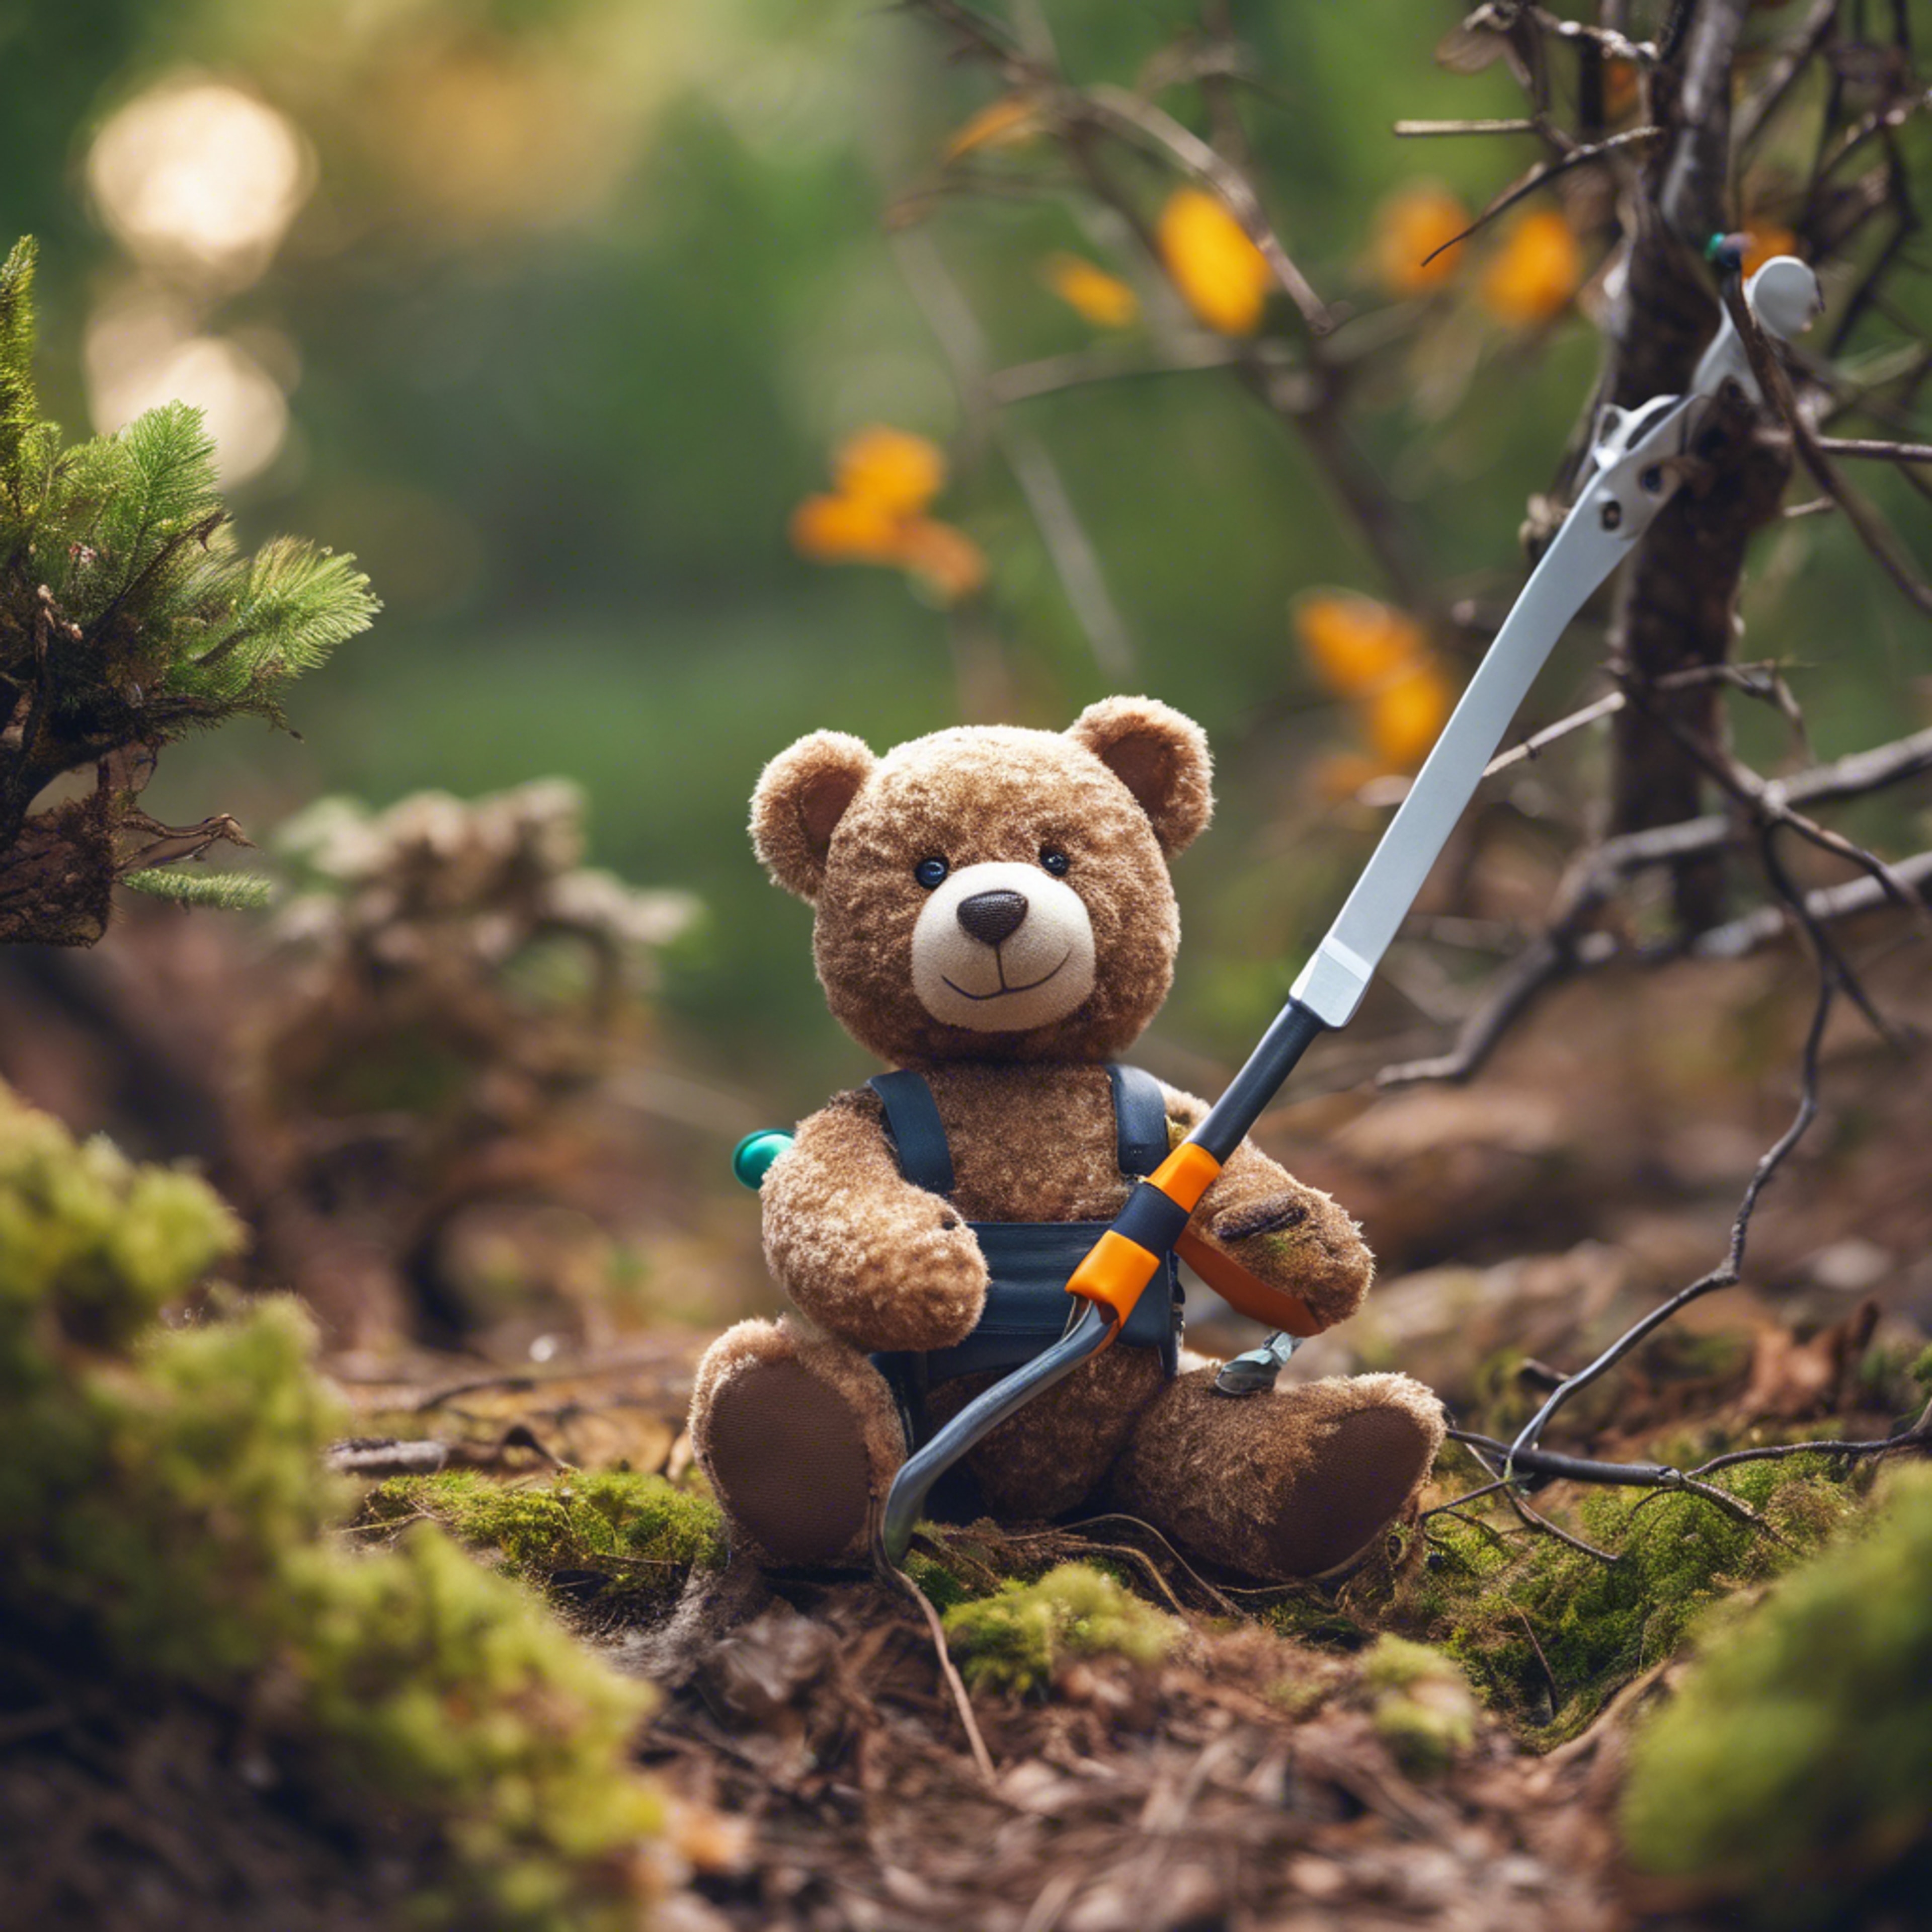 A teddy bear tree trimmer carefully cutting toy branches in a wild wooded landscape.壁紙[8595989464624f45b516]